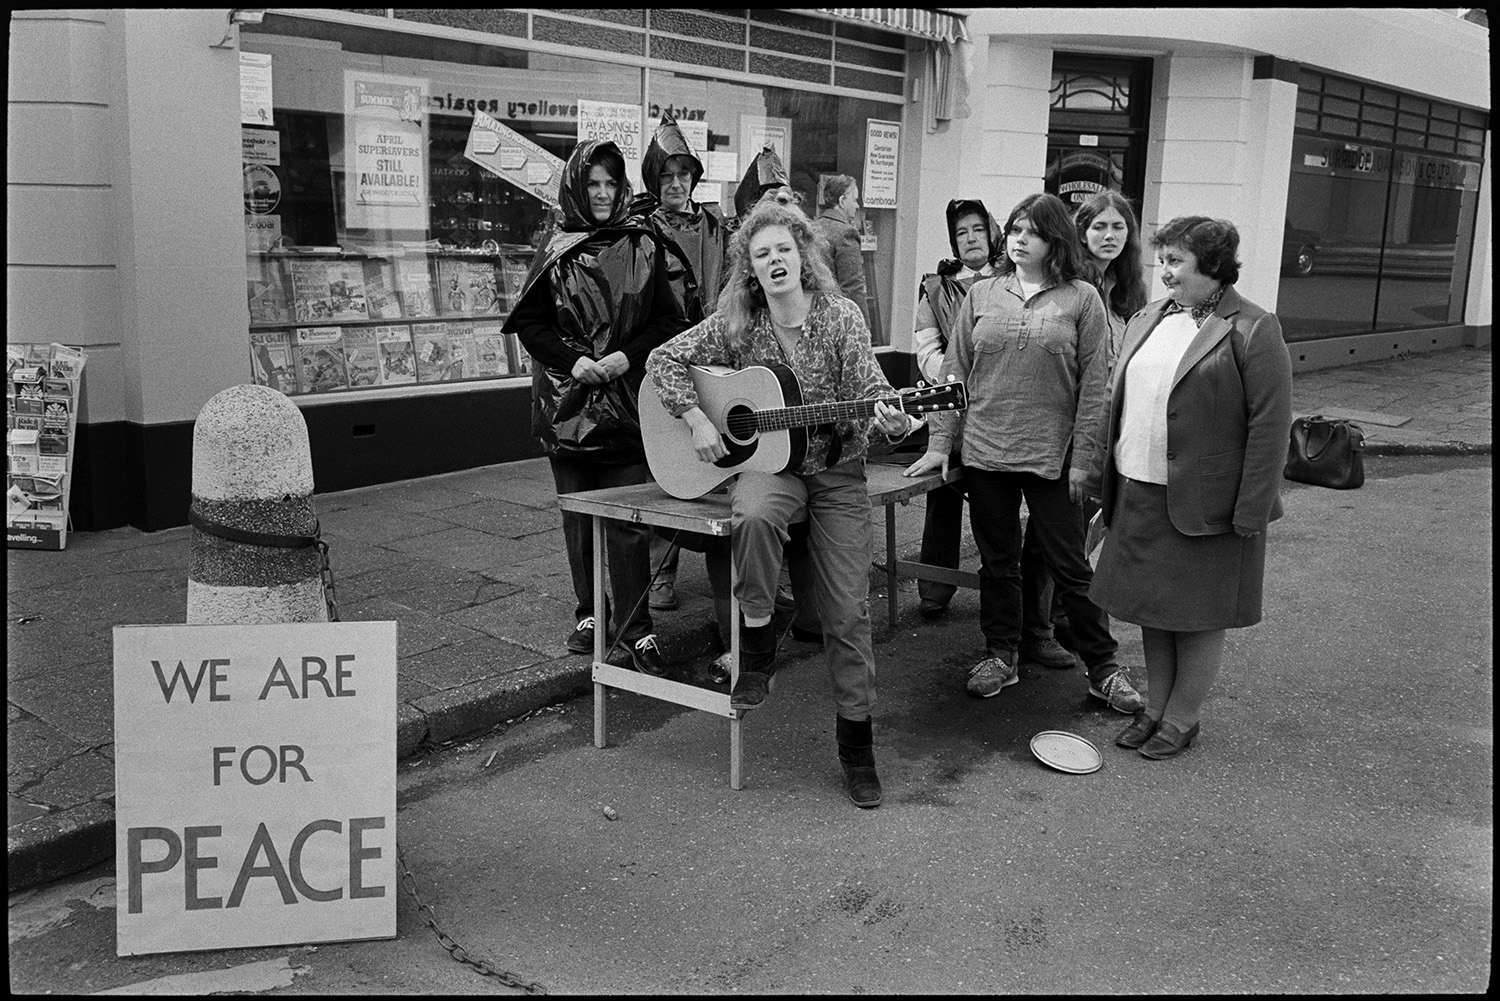 Women's peace movement demonstration, drama and singing songs, photographer. 
[A women's anti-nuclear demonstration in Mill Street, Bideford. One woman is playing a guitar with a small group gathered around her. A shop front can be seen in the background with a display of magazines in the shop window.]